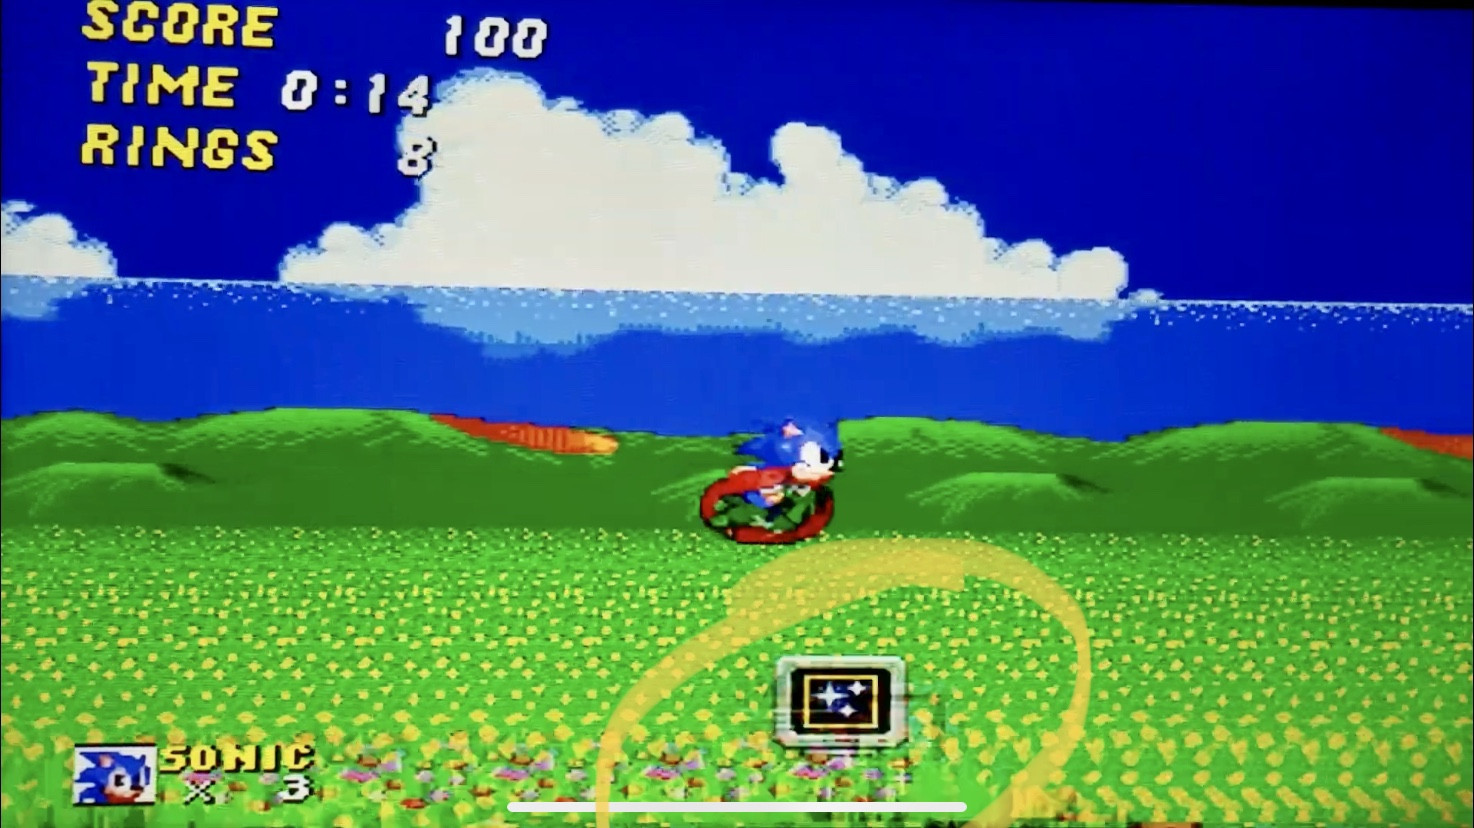 Sonic the Hedgehog 2 – Delisted Games